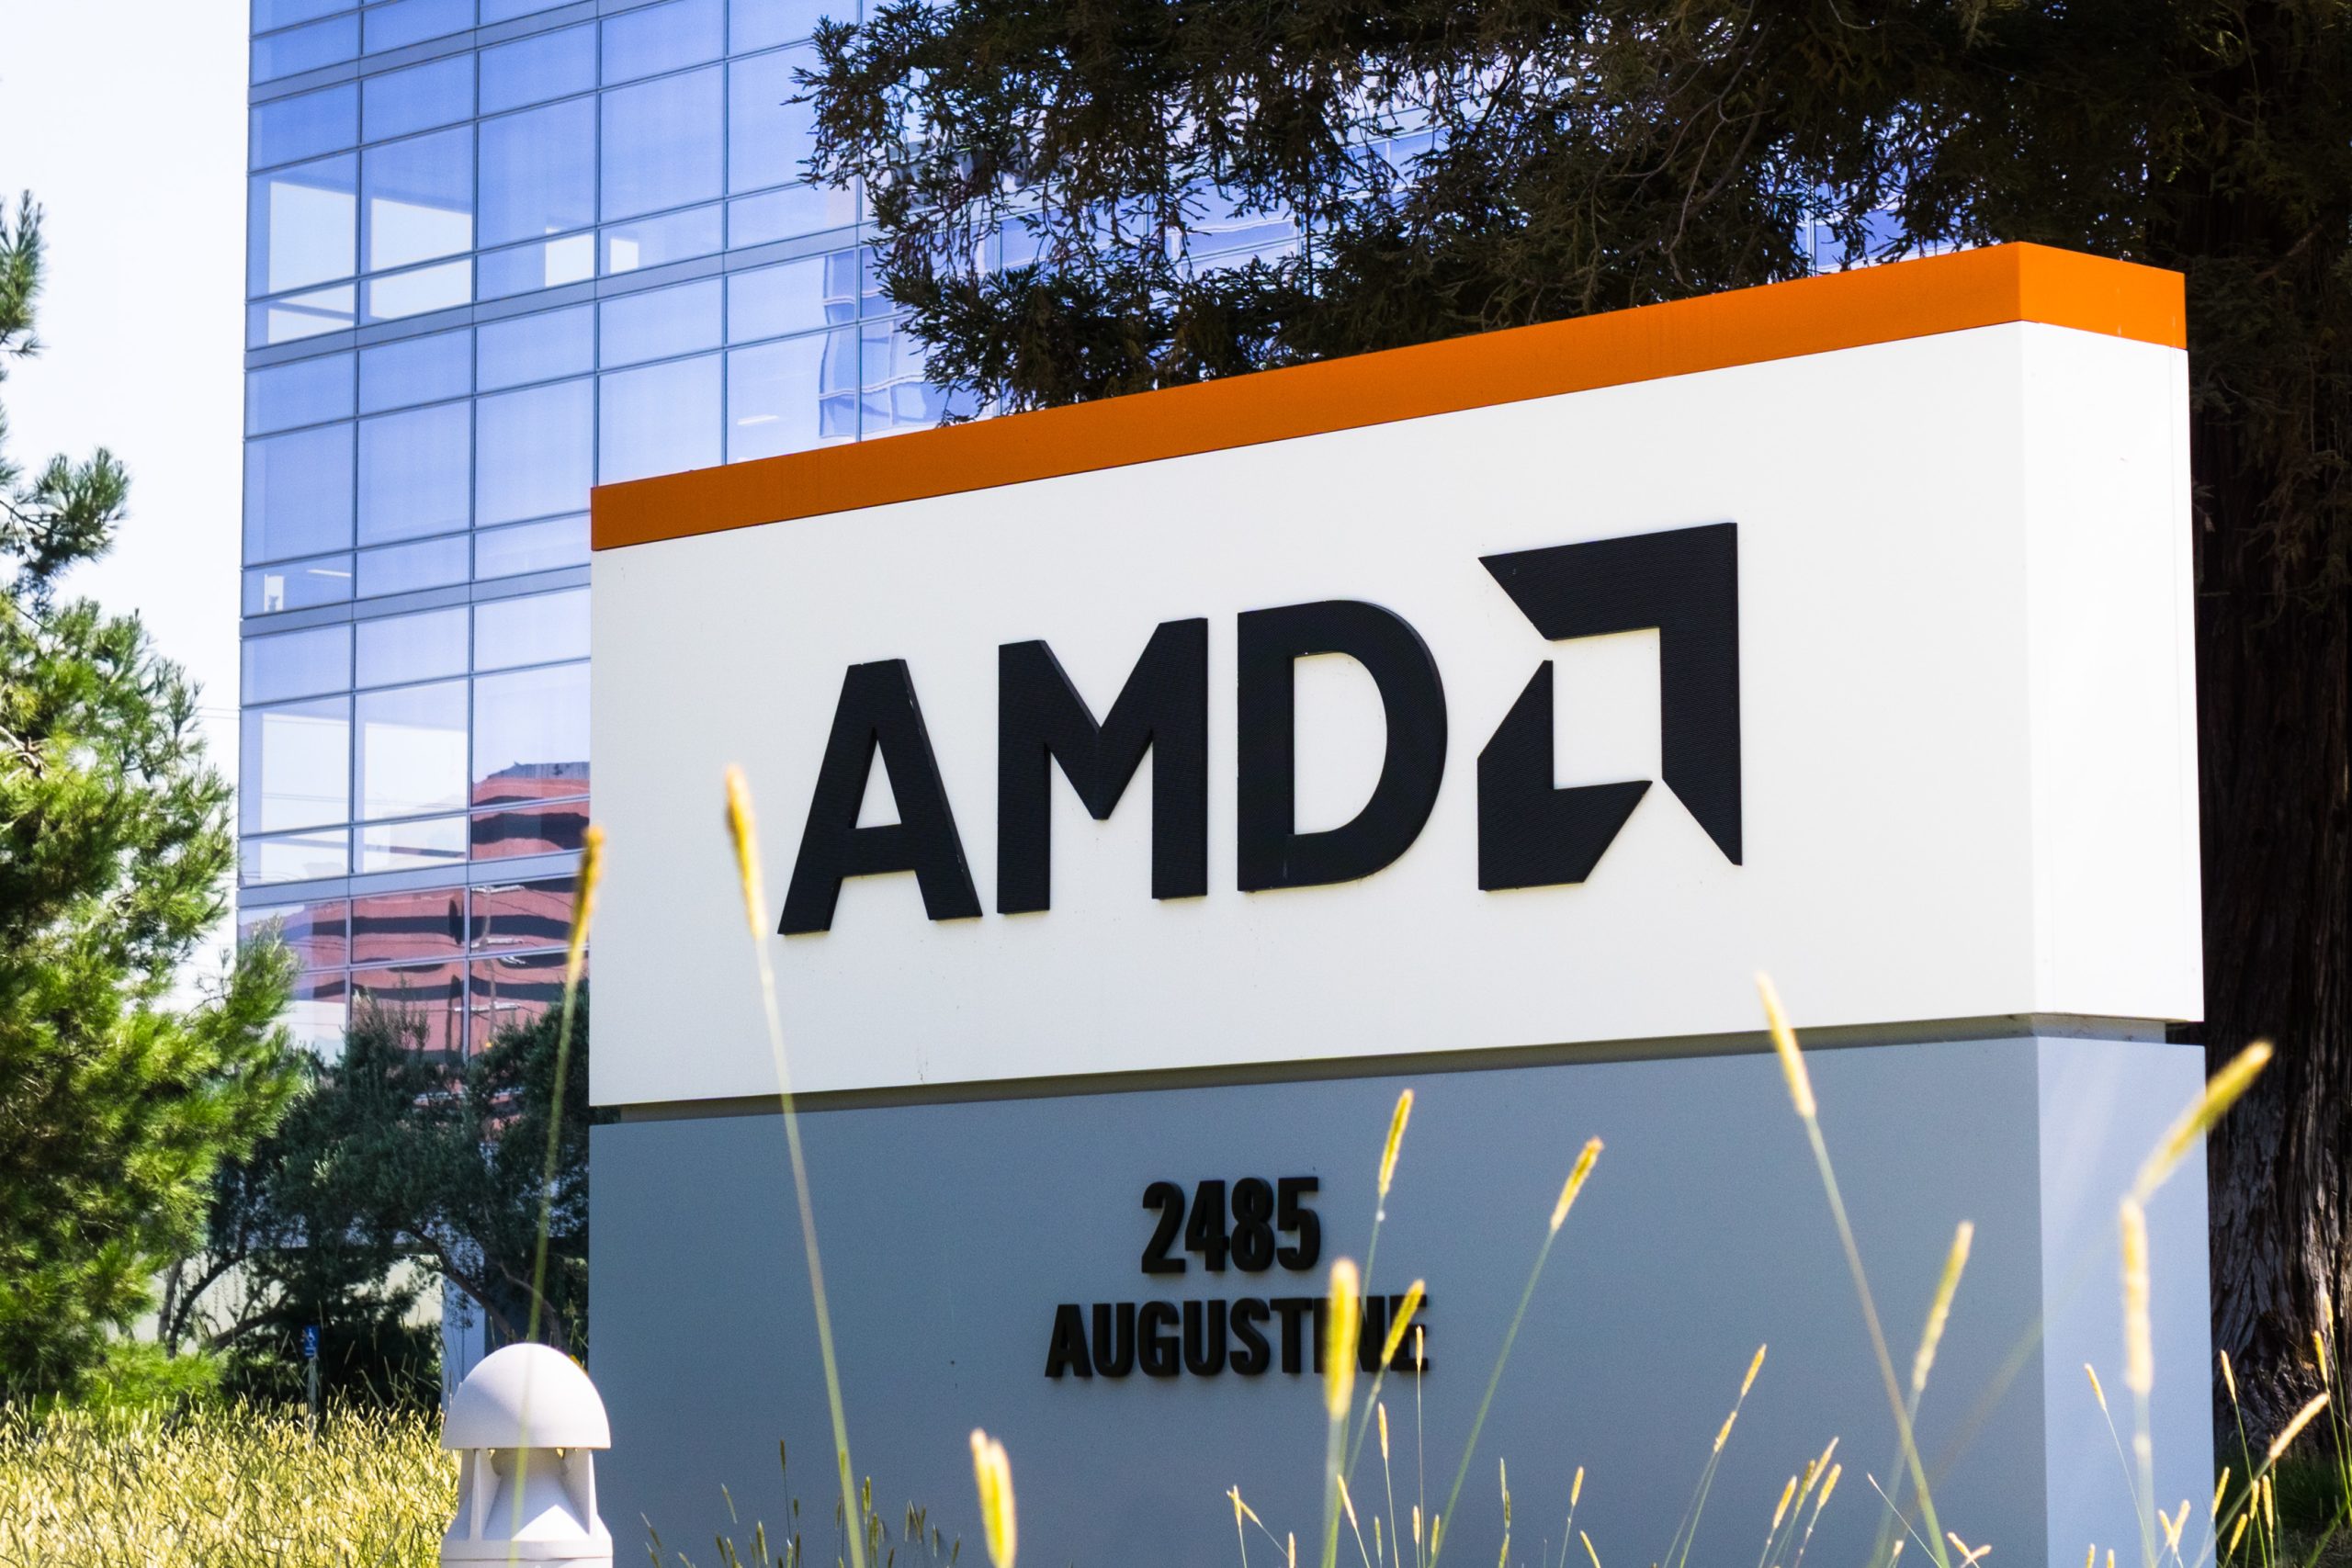 AMD (AMD) Q4 2022 Earnings: What to Expect